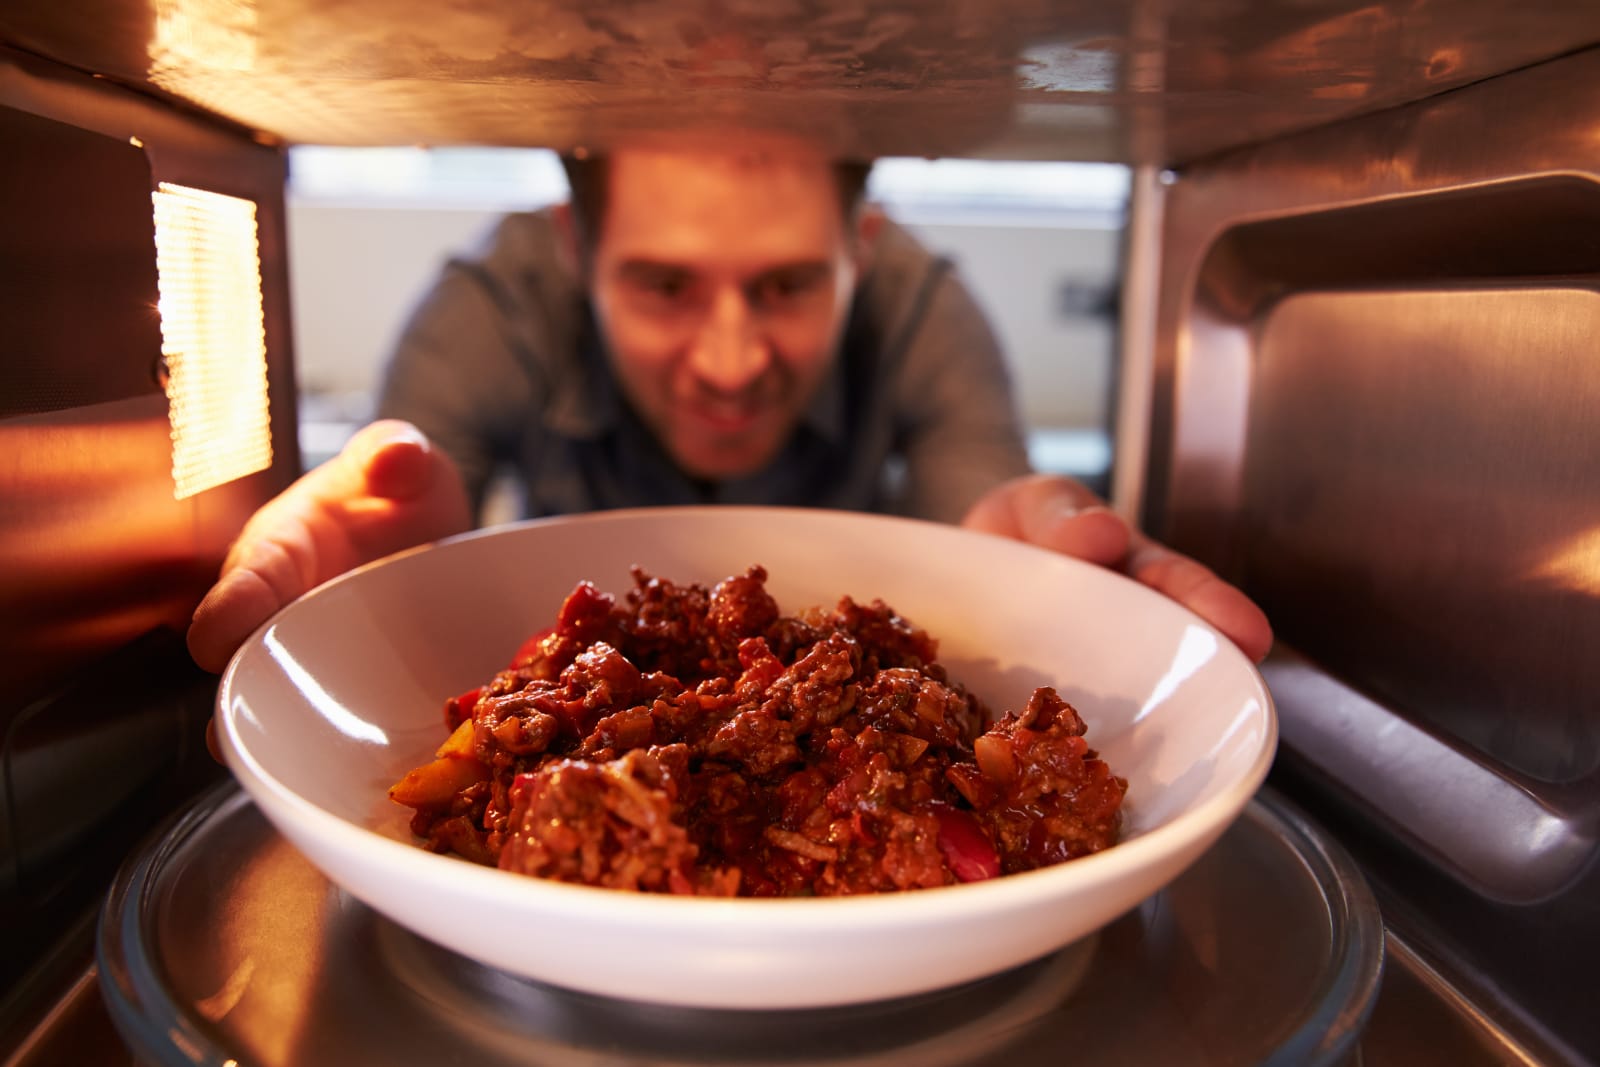 Man Putting Leftover Chili Into Microwave Oven To Cook